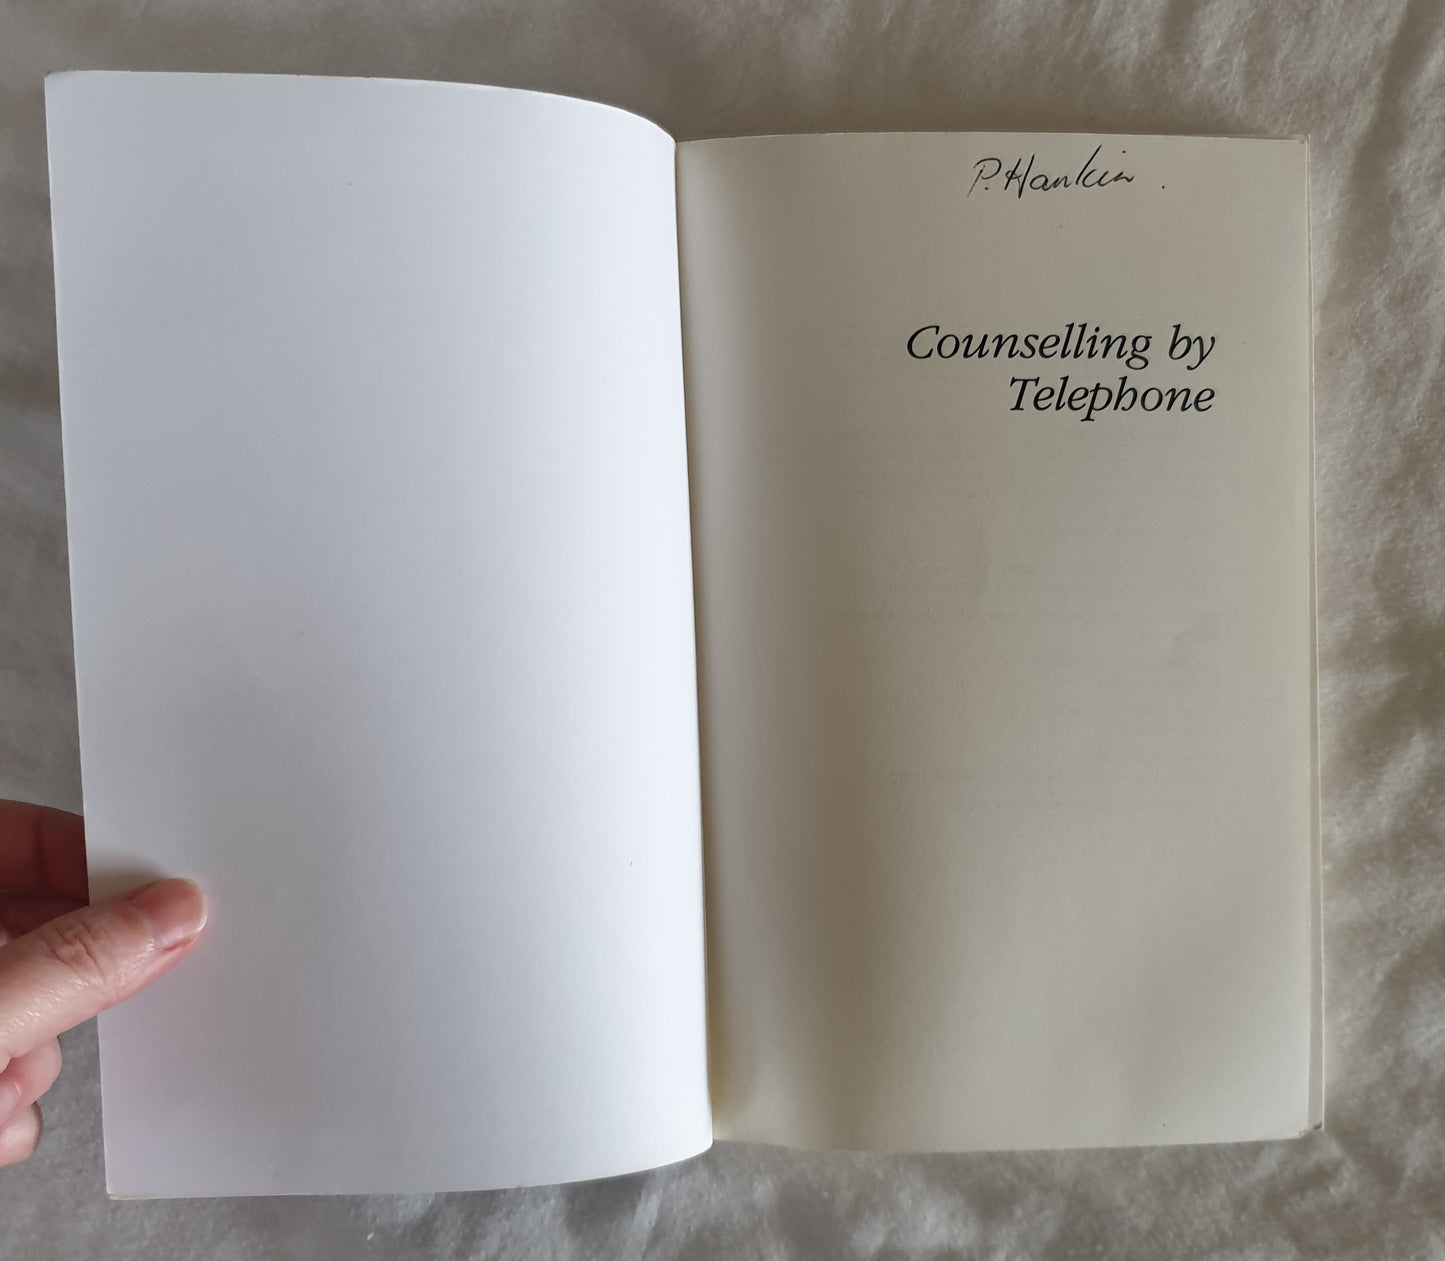 Counselling by Telephone by Maxine Rosenfield